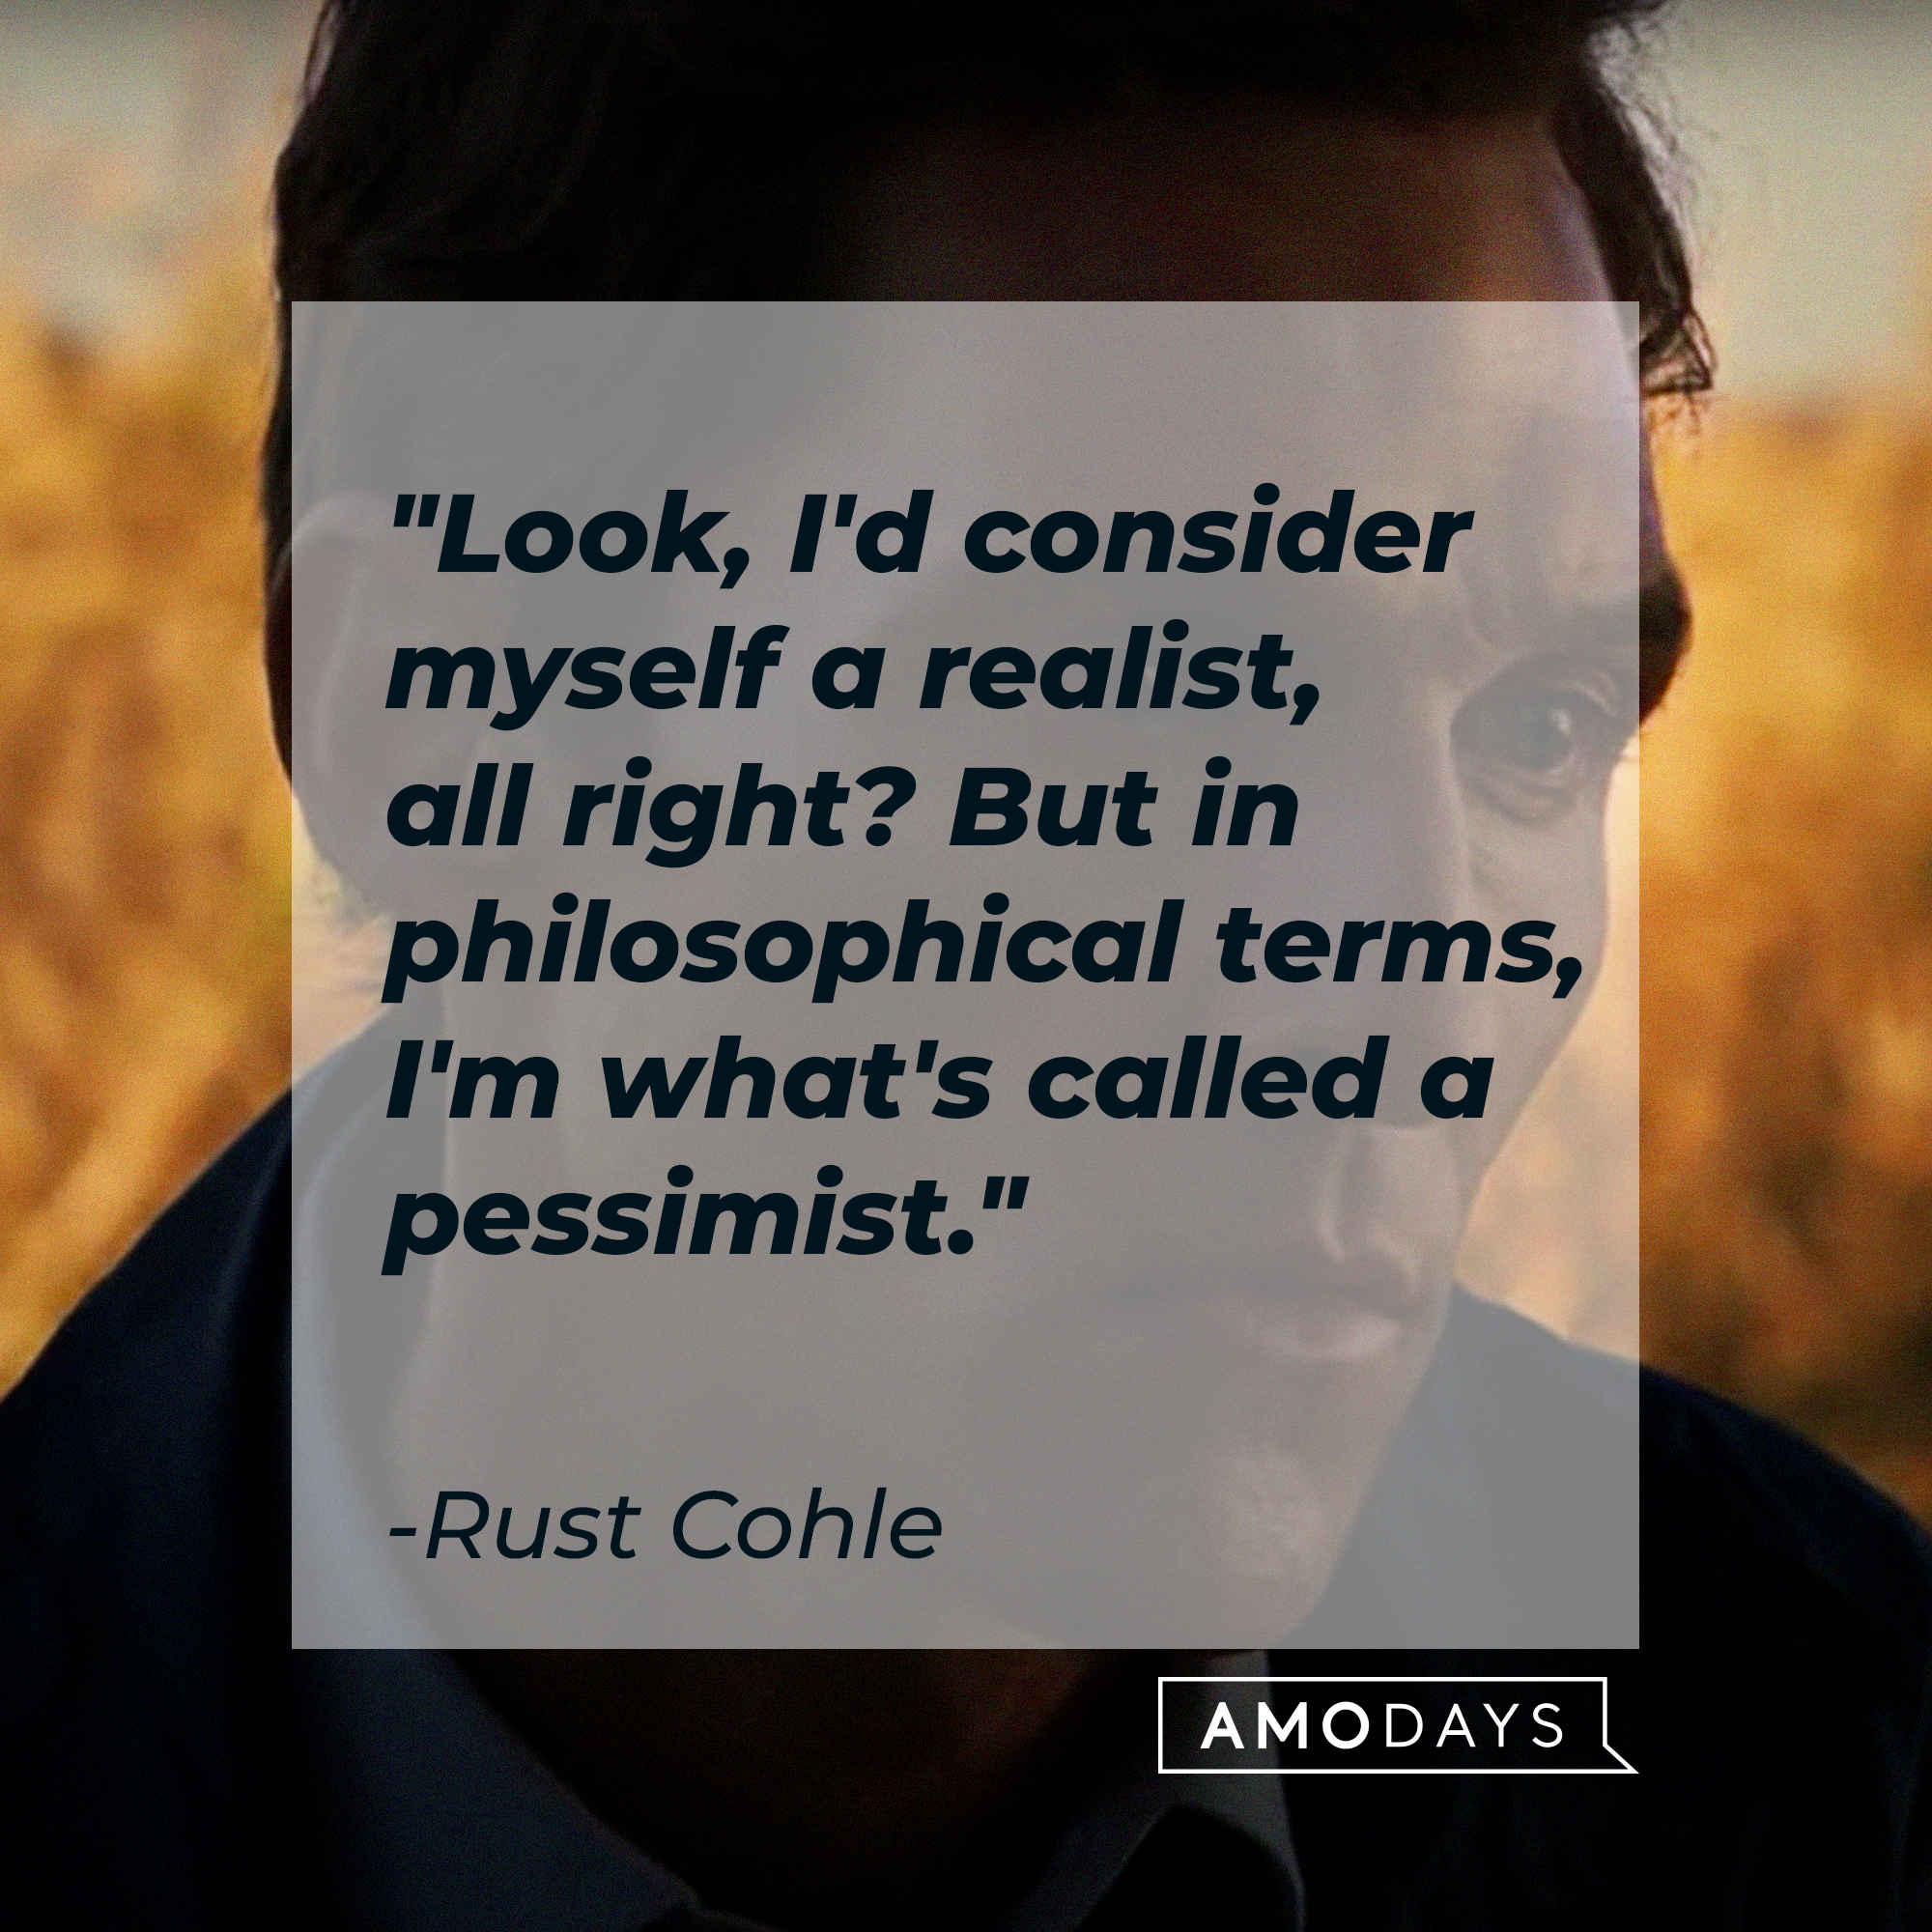 Rust Cohle's quote: "Look, I'd consider myself a realist, all right? But in philosophical terms, I'm what's called a pessimist." | Source: facebook.com/TrueDetective